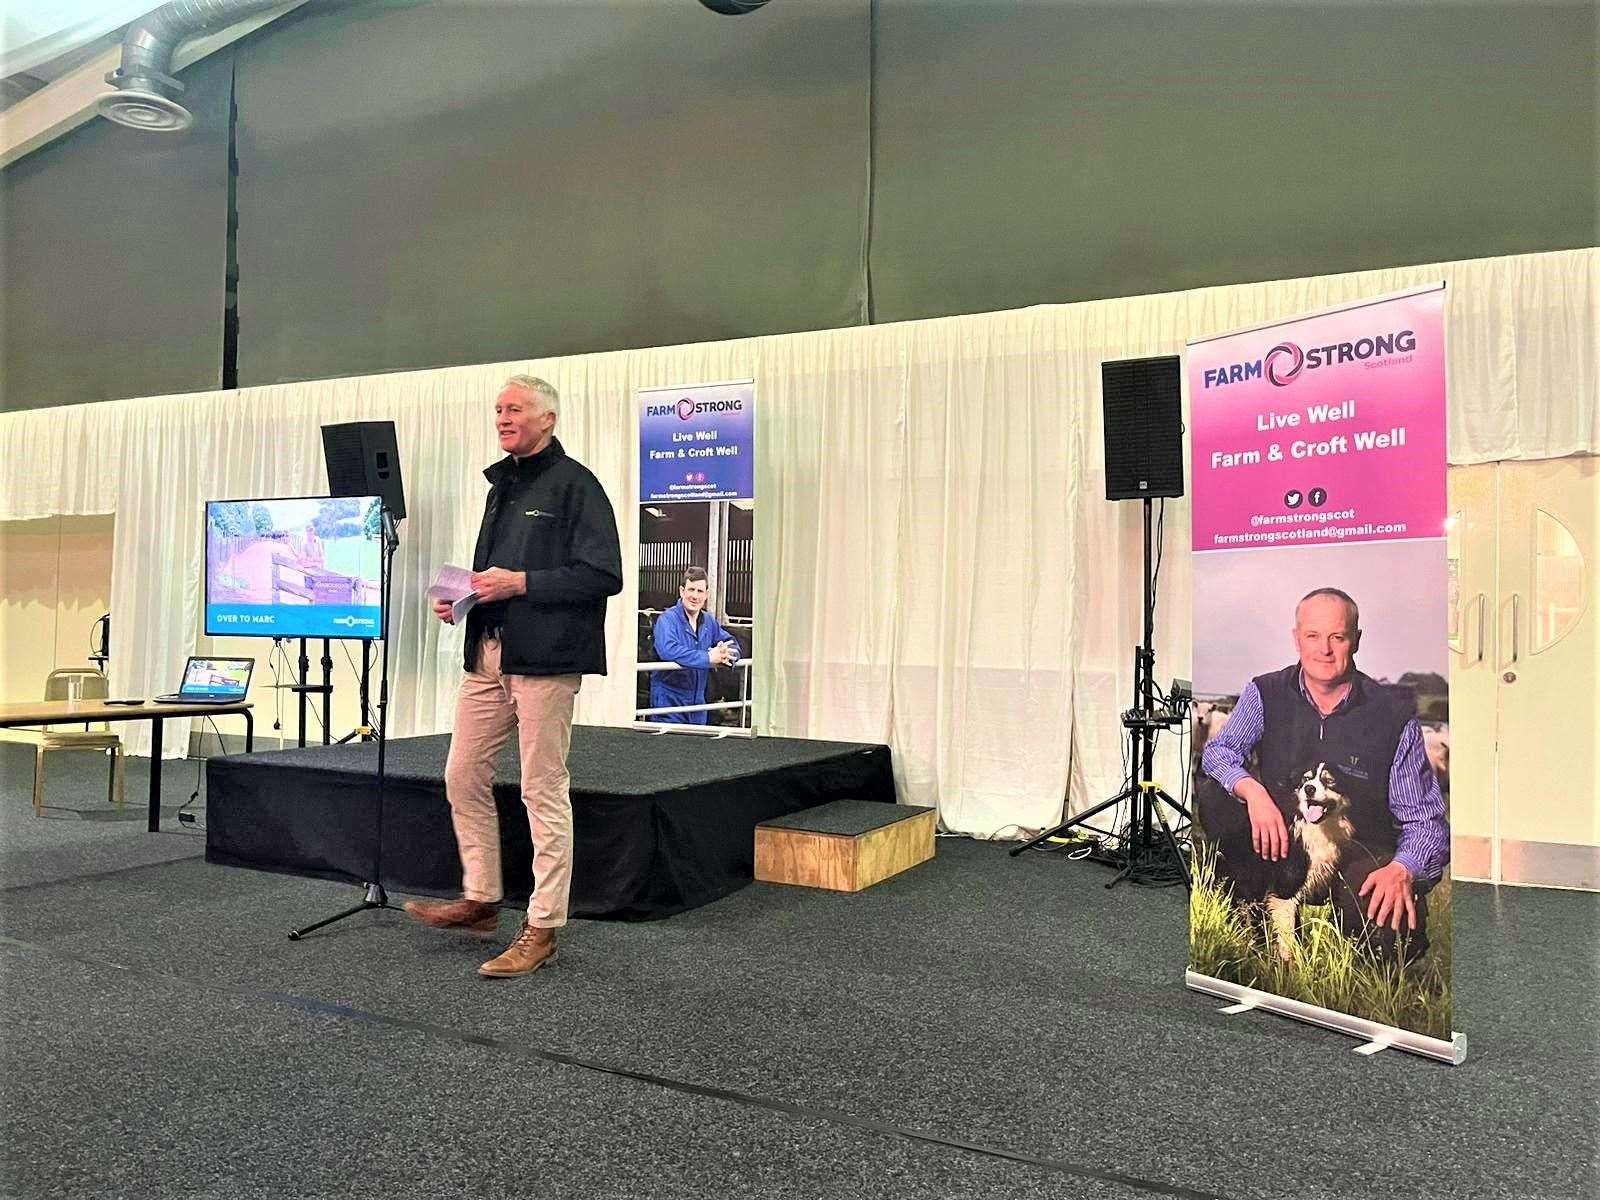 Marc Gascoigne presenting at one of the Farmstrong Scotland events.